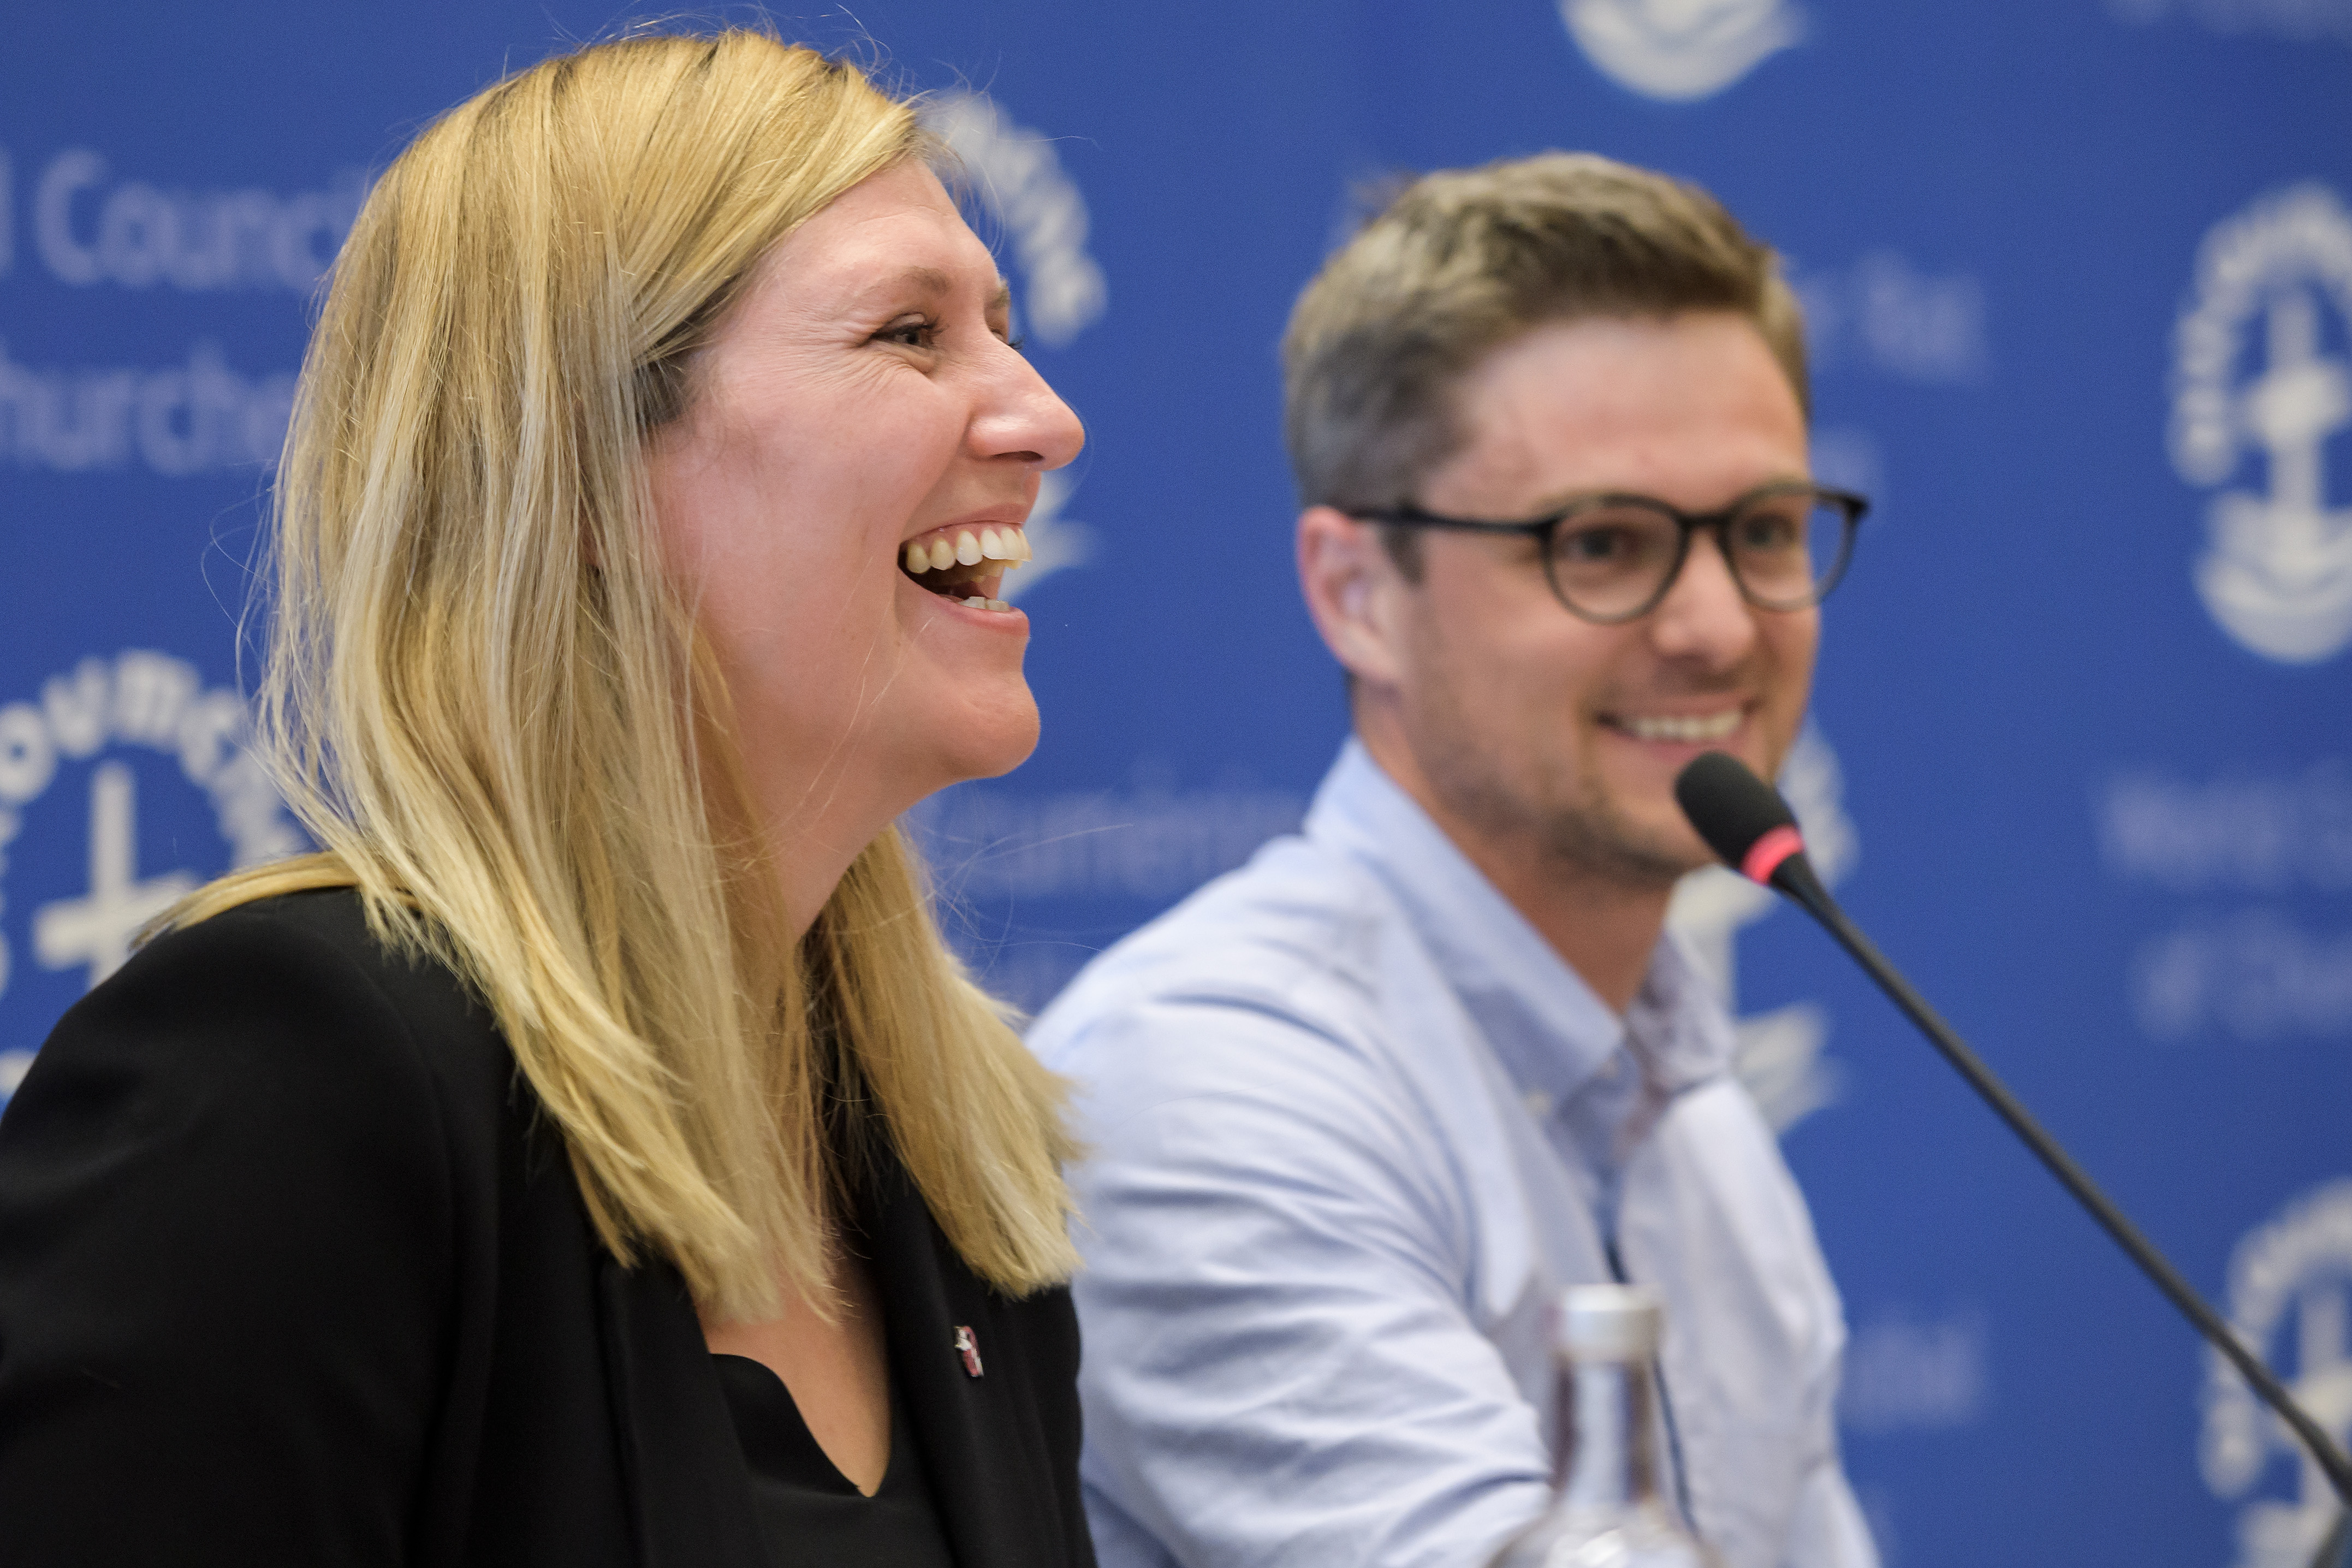 ICAN Executive director Beatrice Fihn (L) reacts next to coordinator Daniel Hogstan (R) during a press conference after ICAN won the Nobel Peace Prize on October 6, 2017 in Geneva.